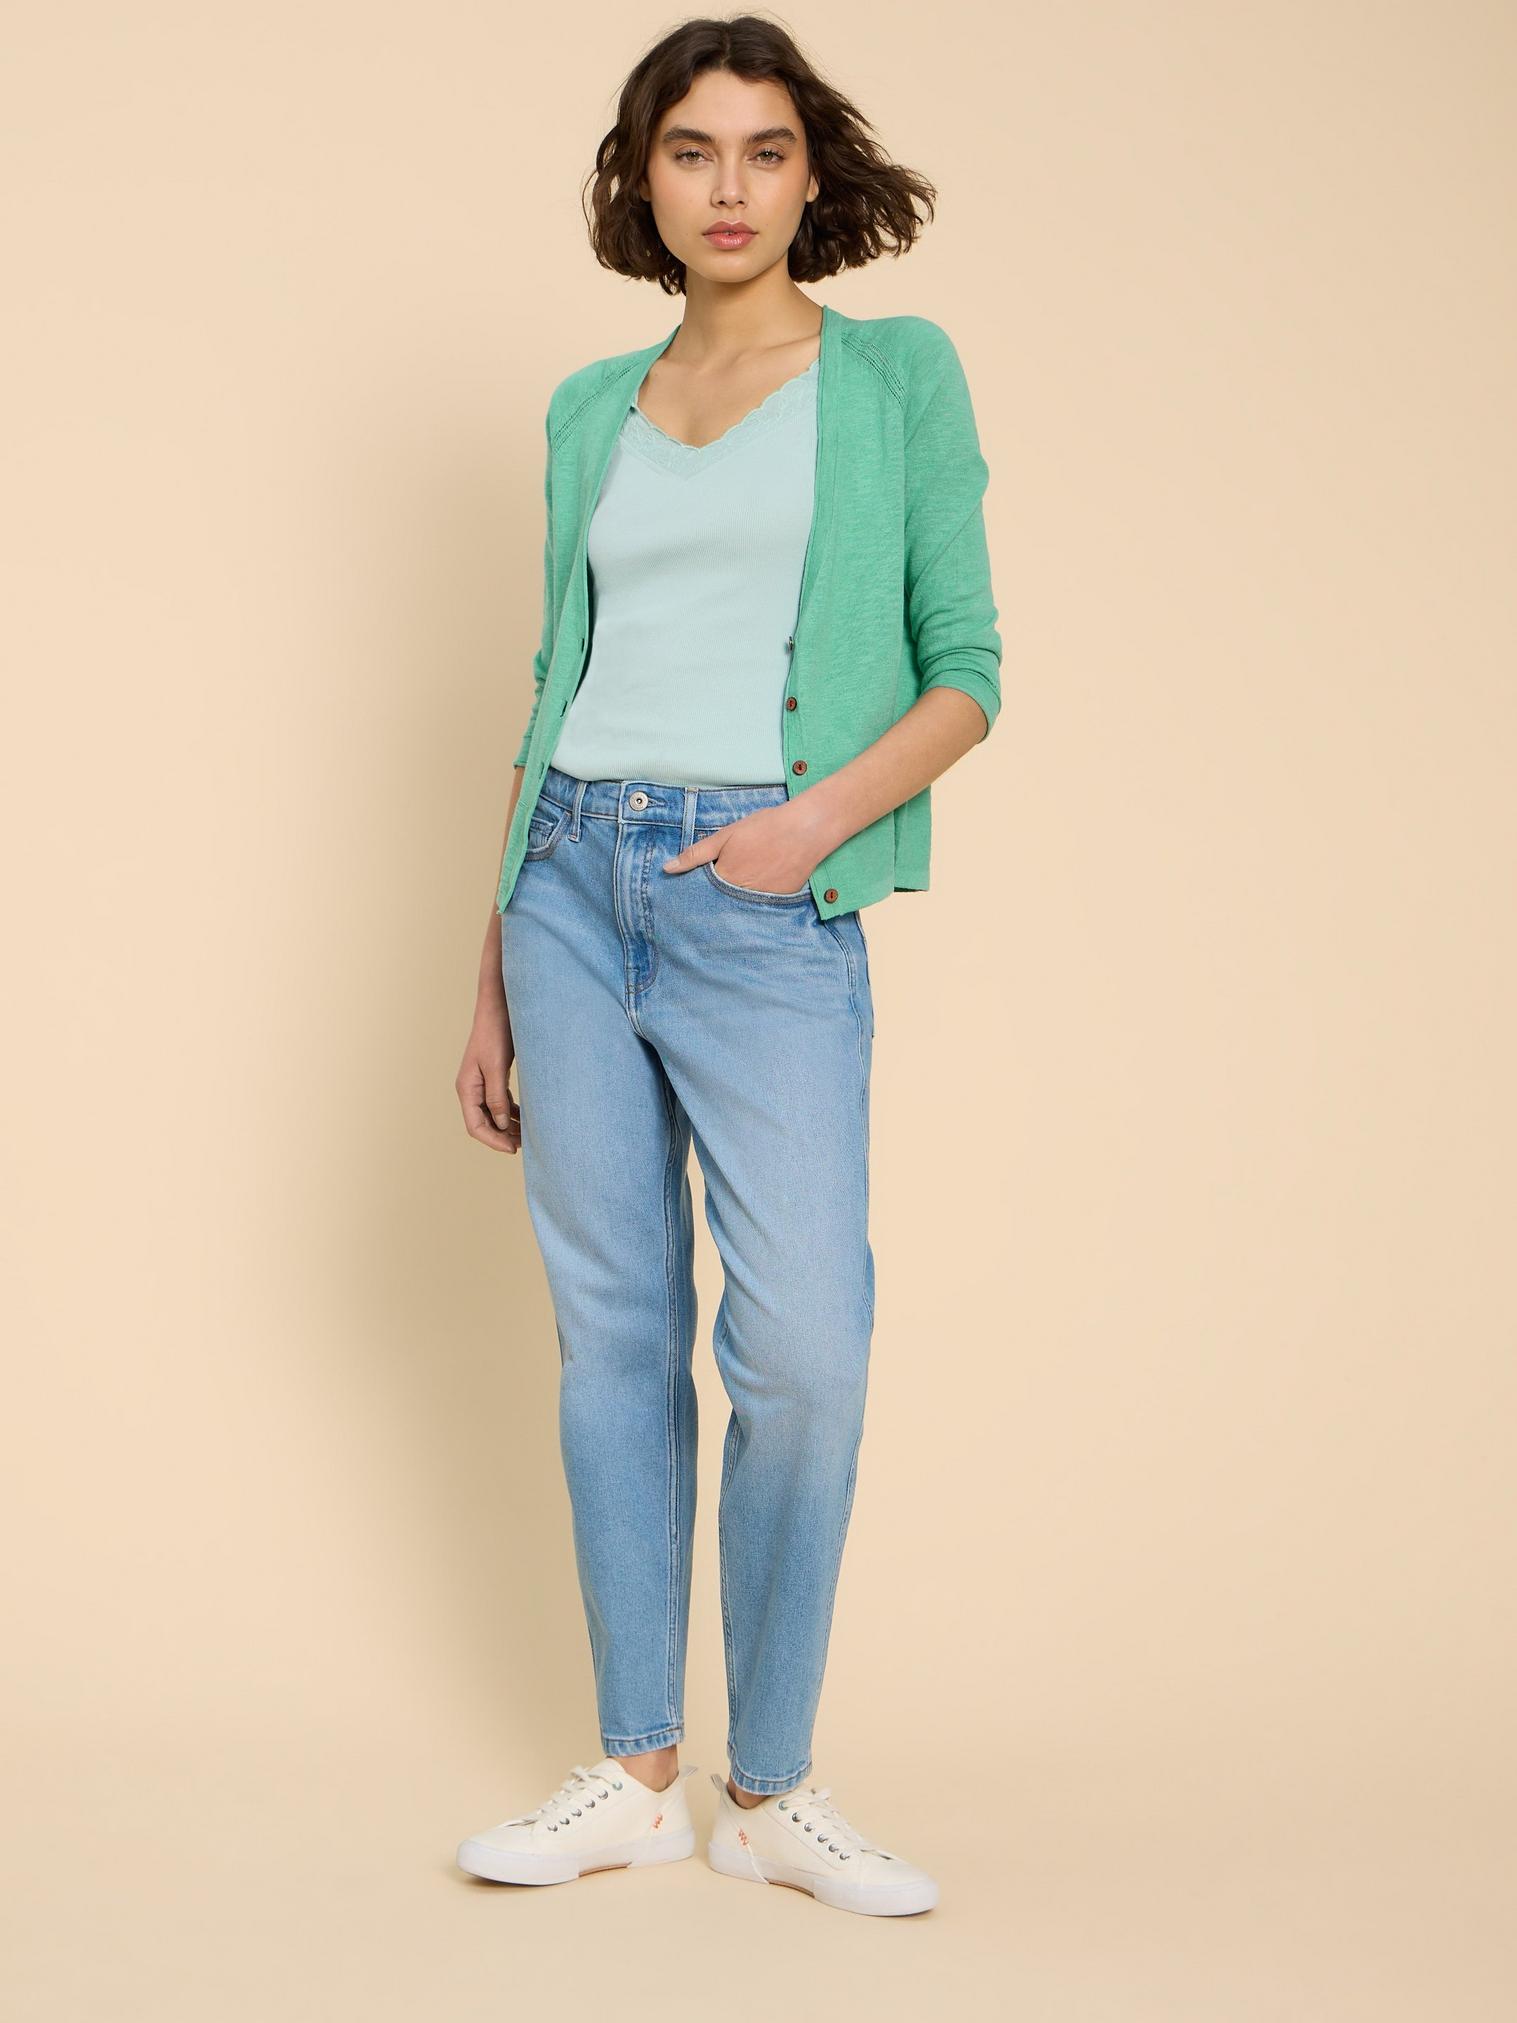 NARIA V  NECK CARDI in MID TEAL - LIFESTYLE